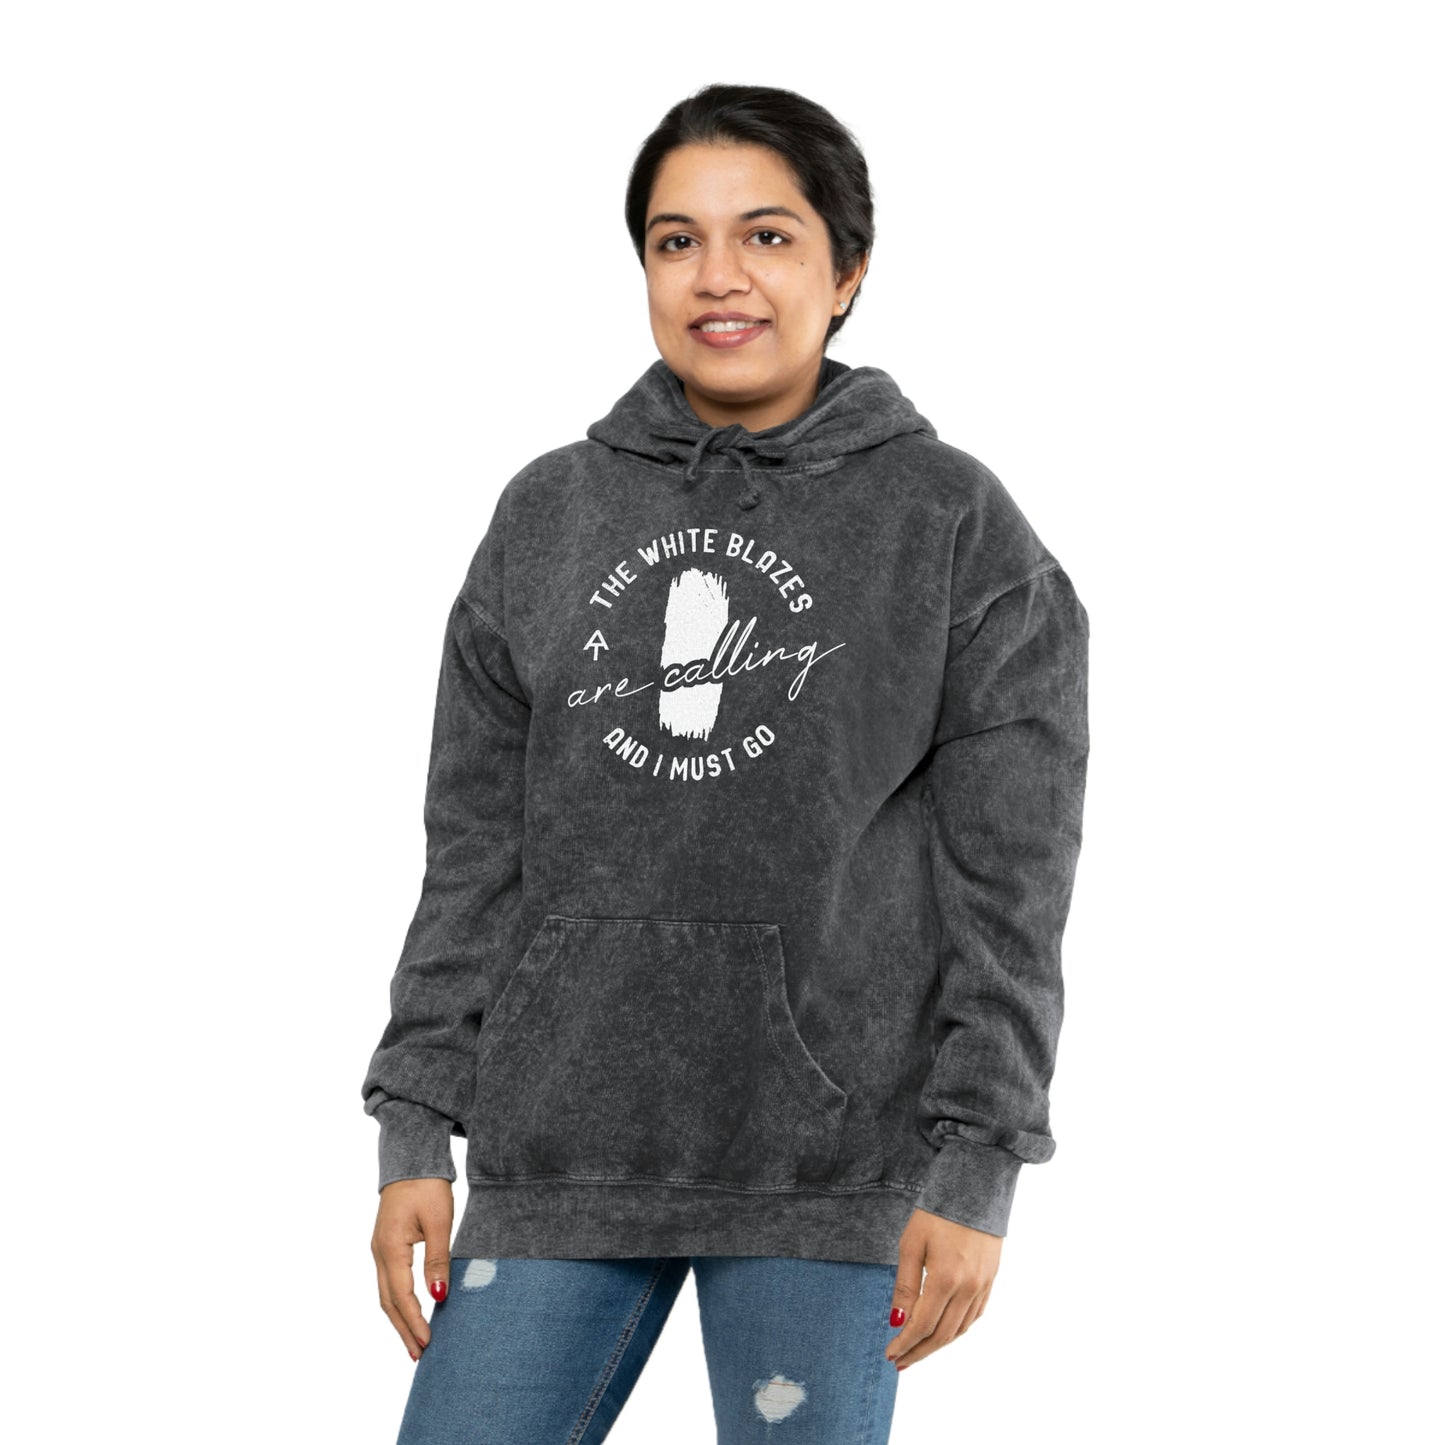 White Blazes Are Calling - Unisex Mineral Wash Hoodie